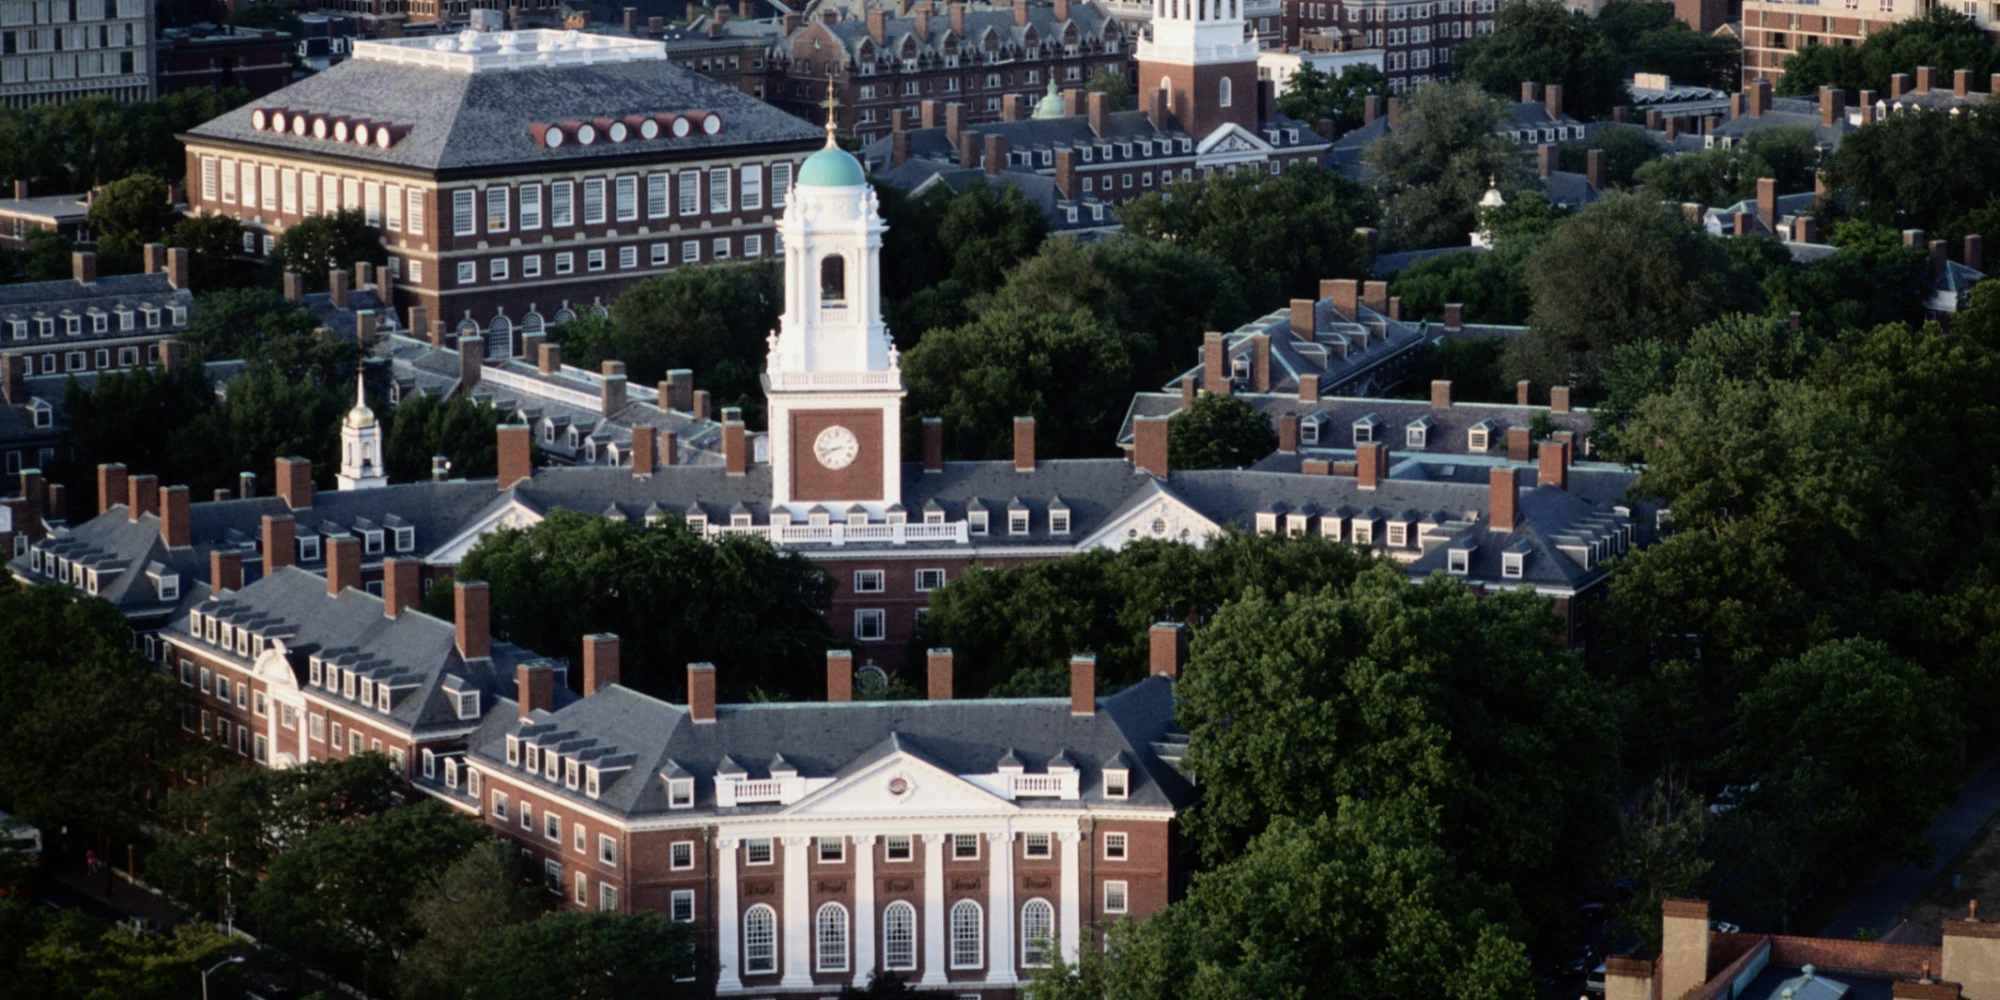 Harvard University is the oldest institution of higher education in the United States and one of the most prestigious universities in the world.